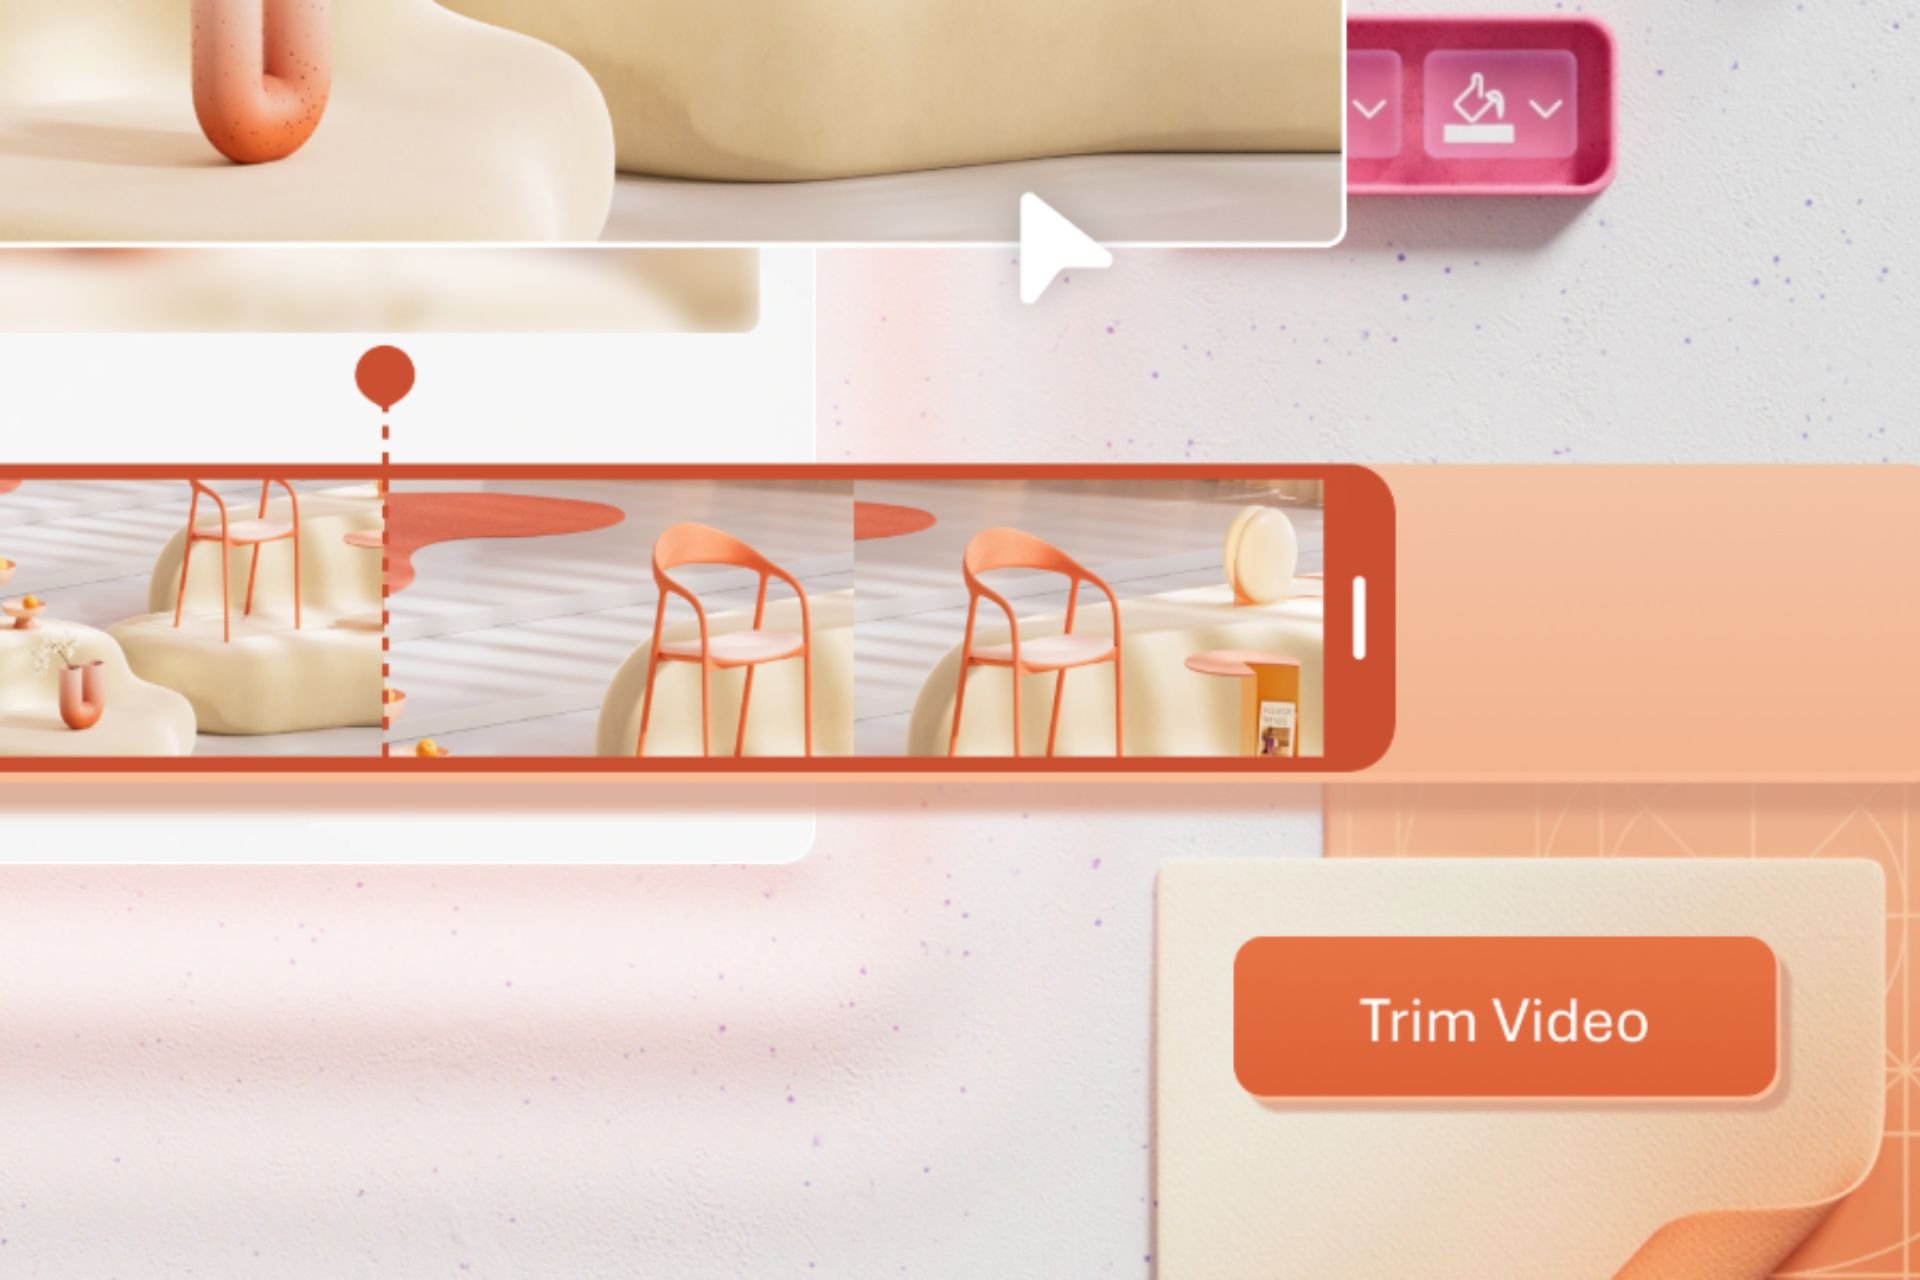 With this exciting update, you can now trim videos in PowerPoint for the Web